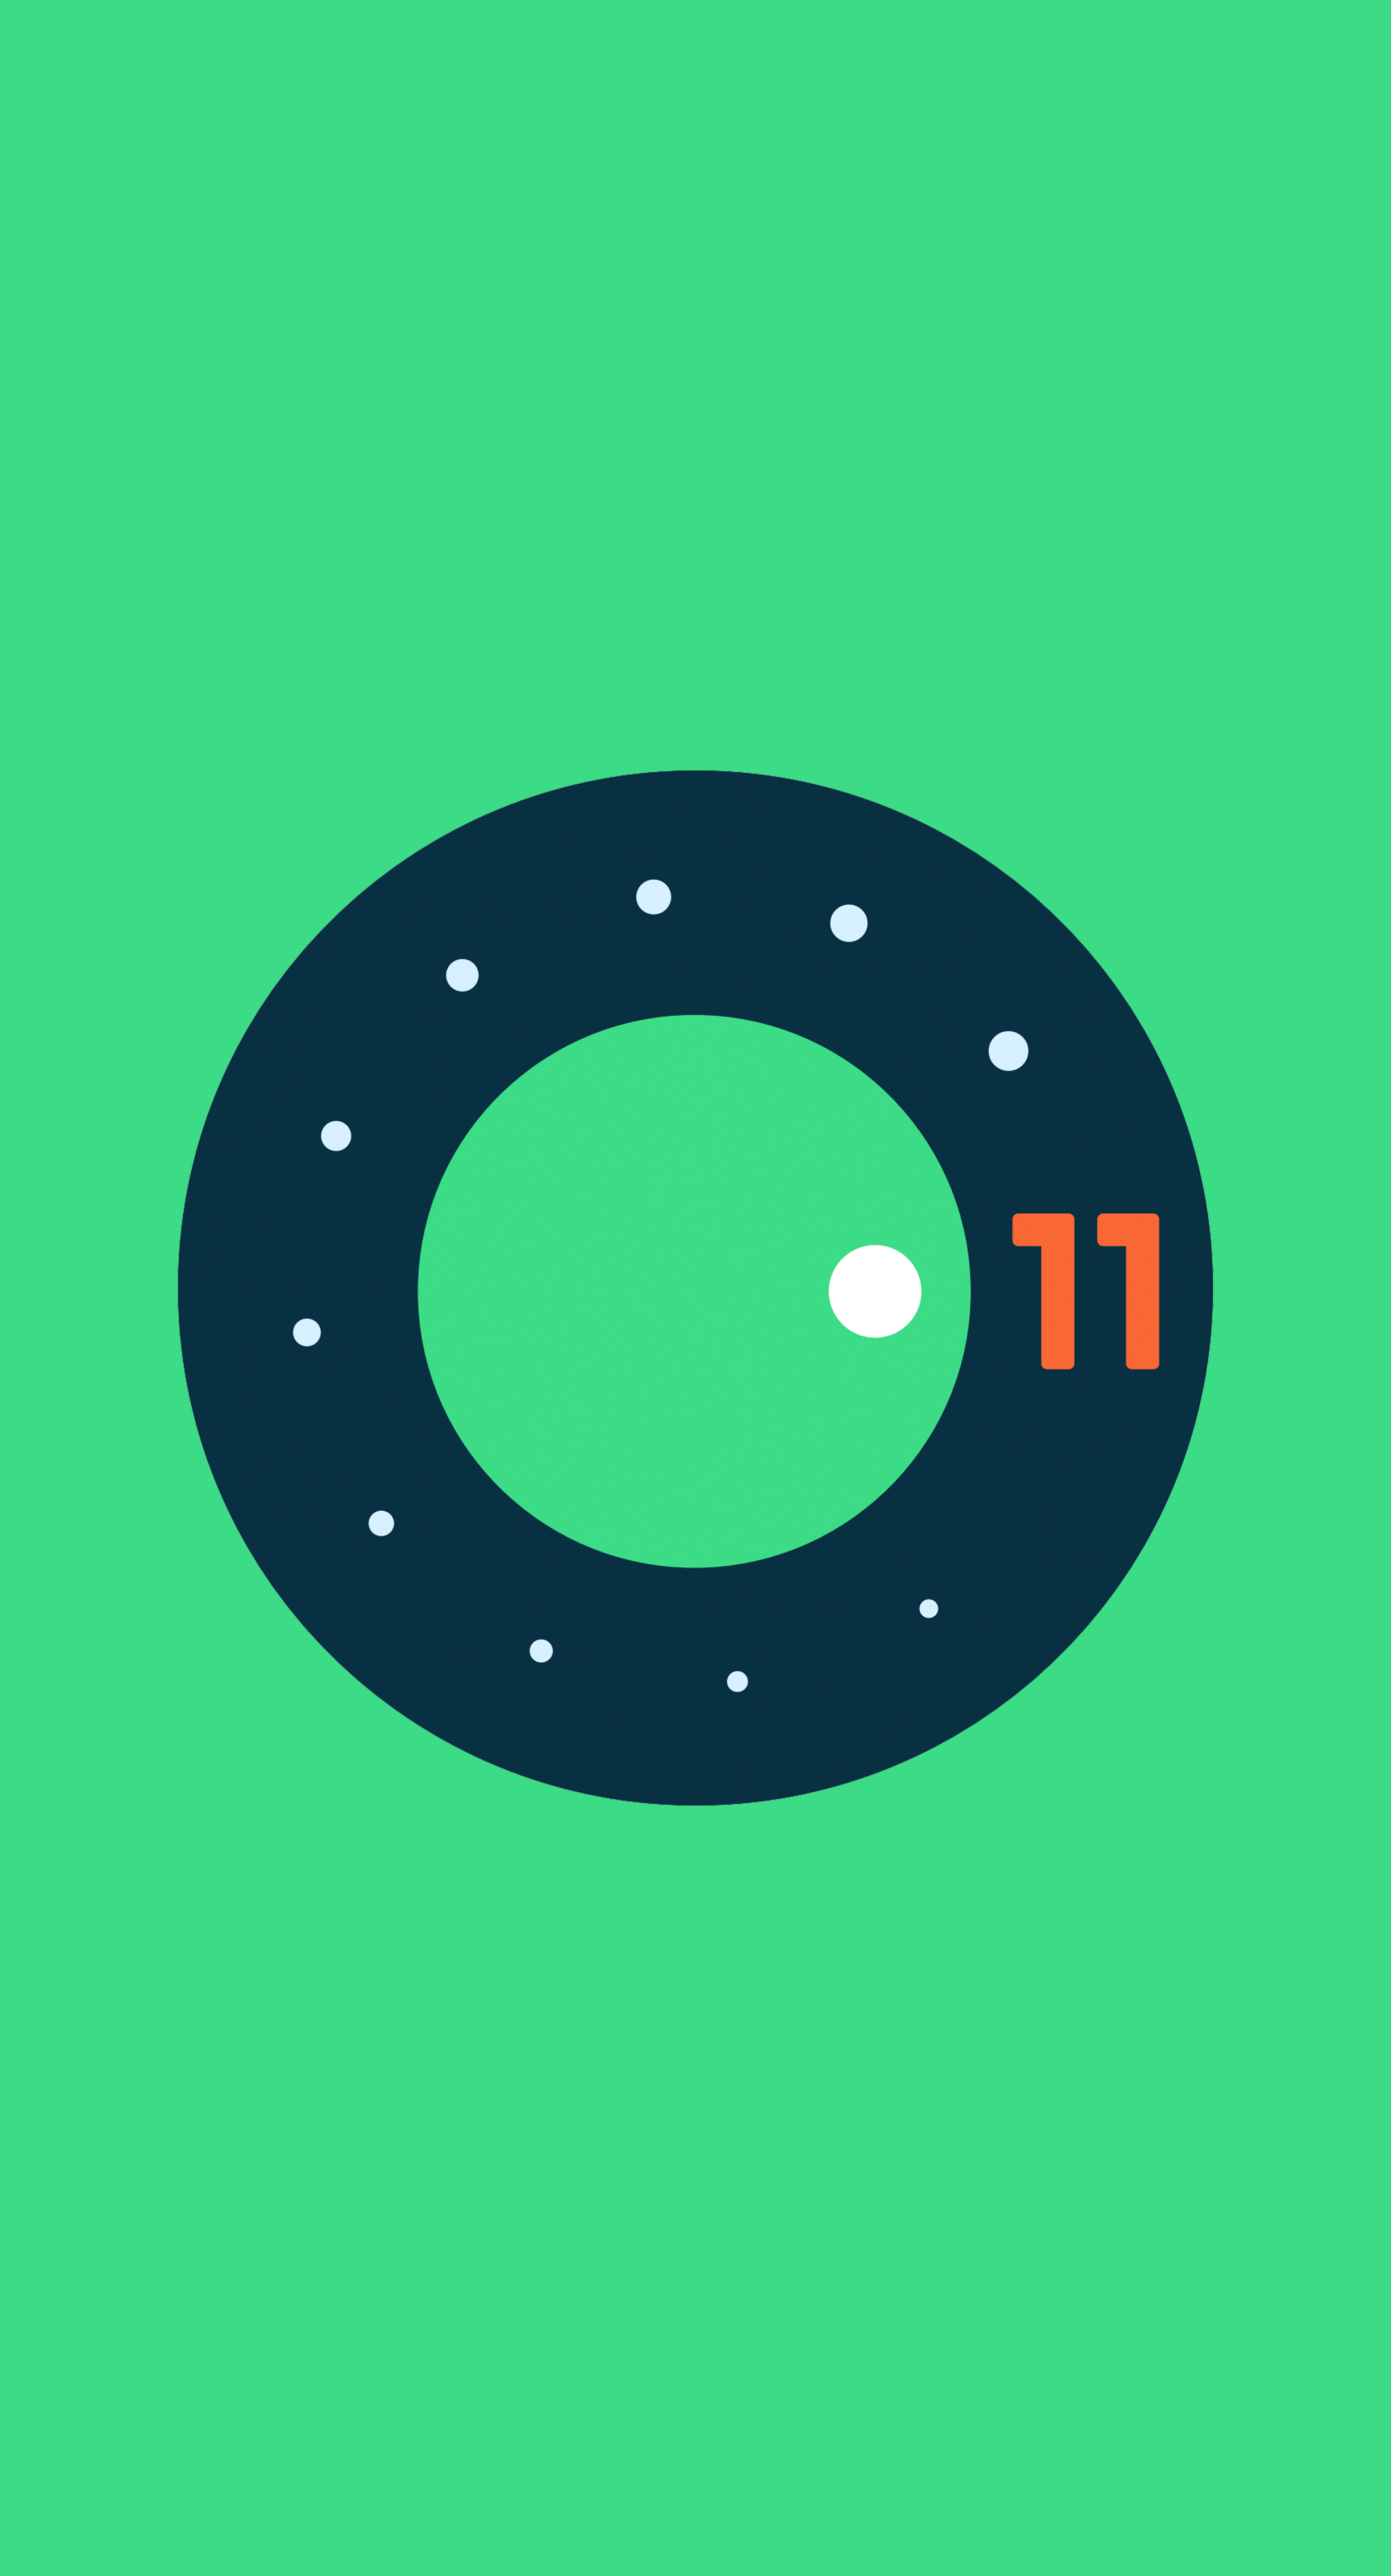 android-11-logo-green.png